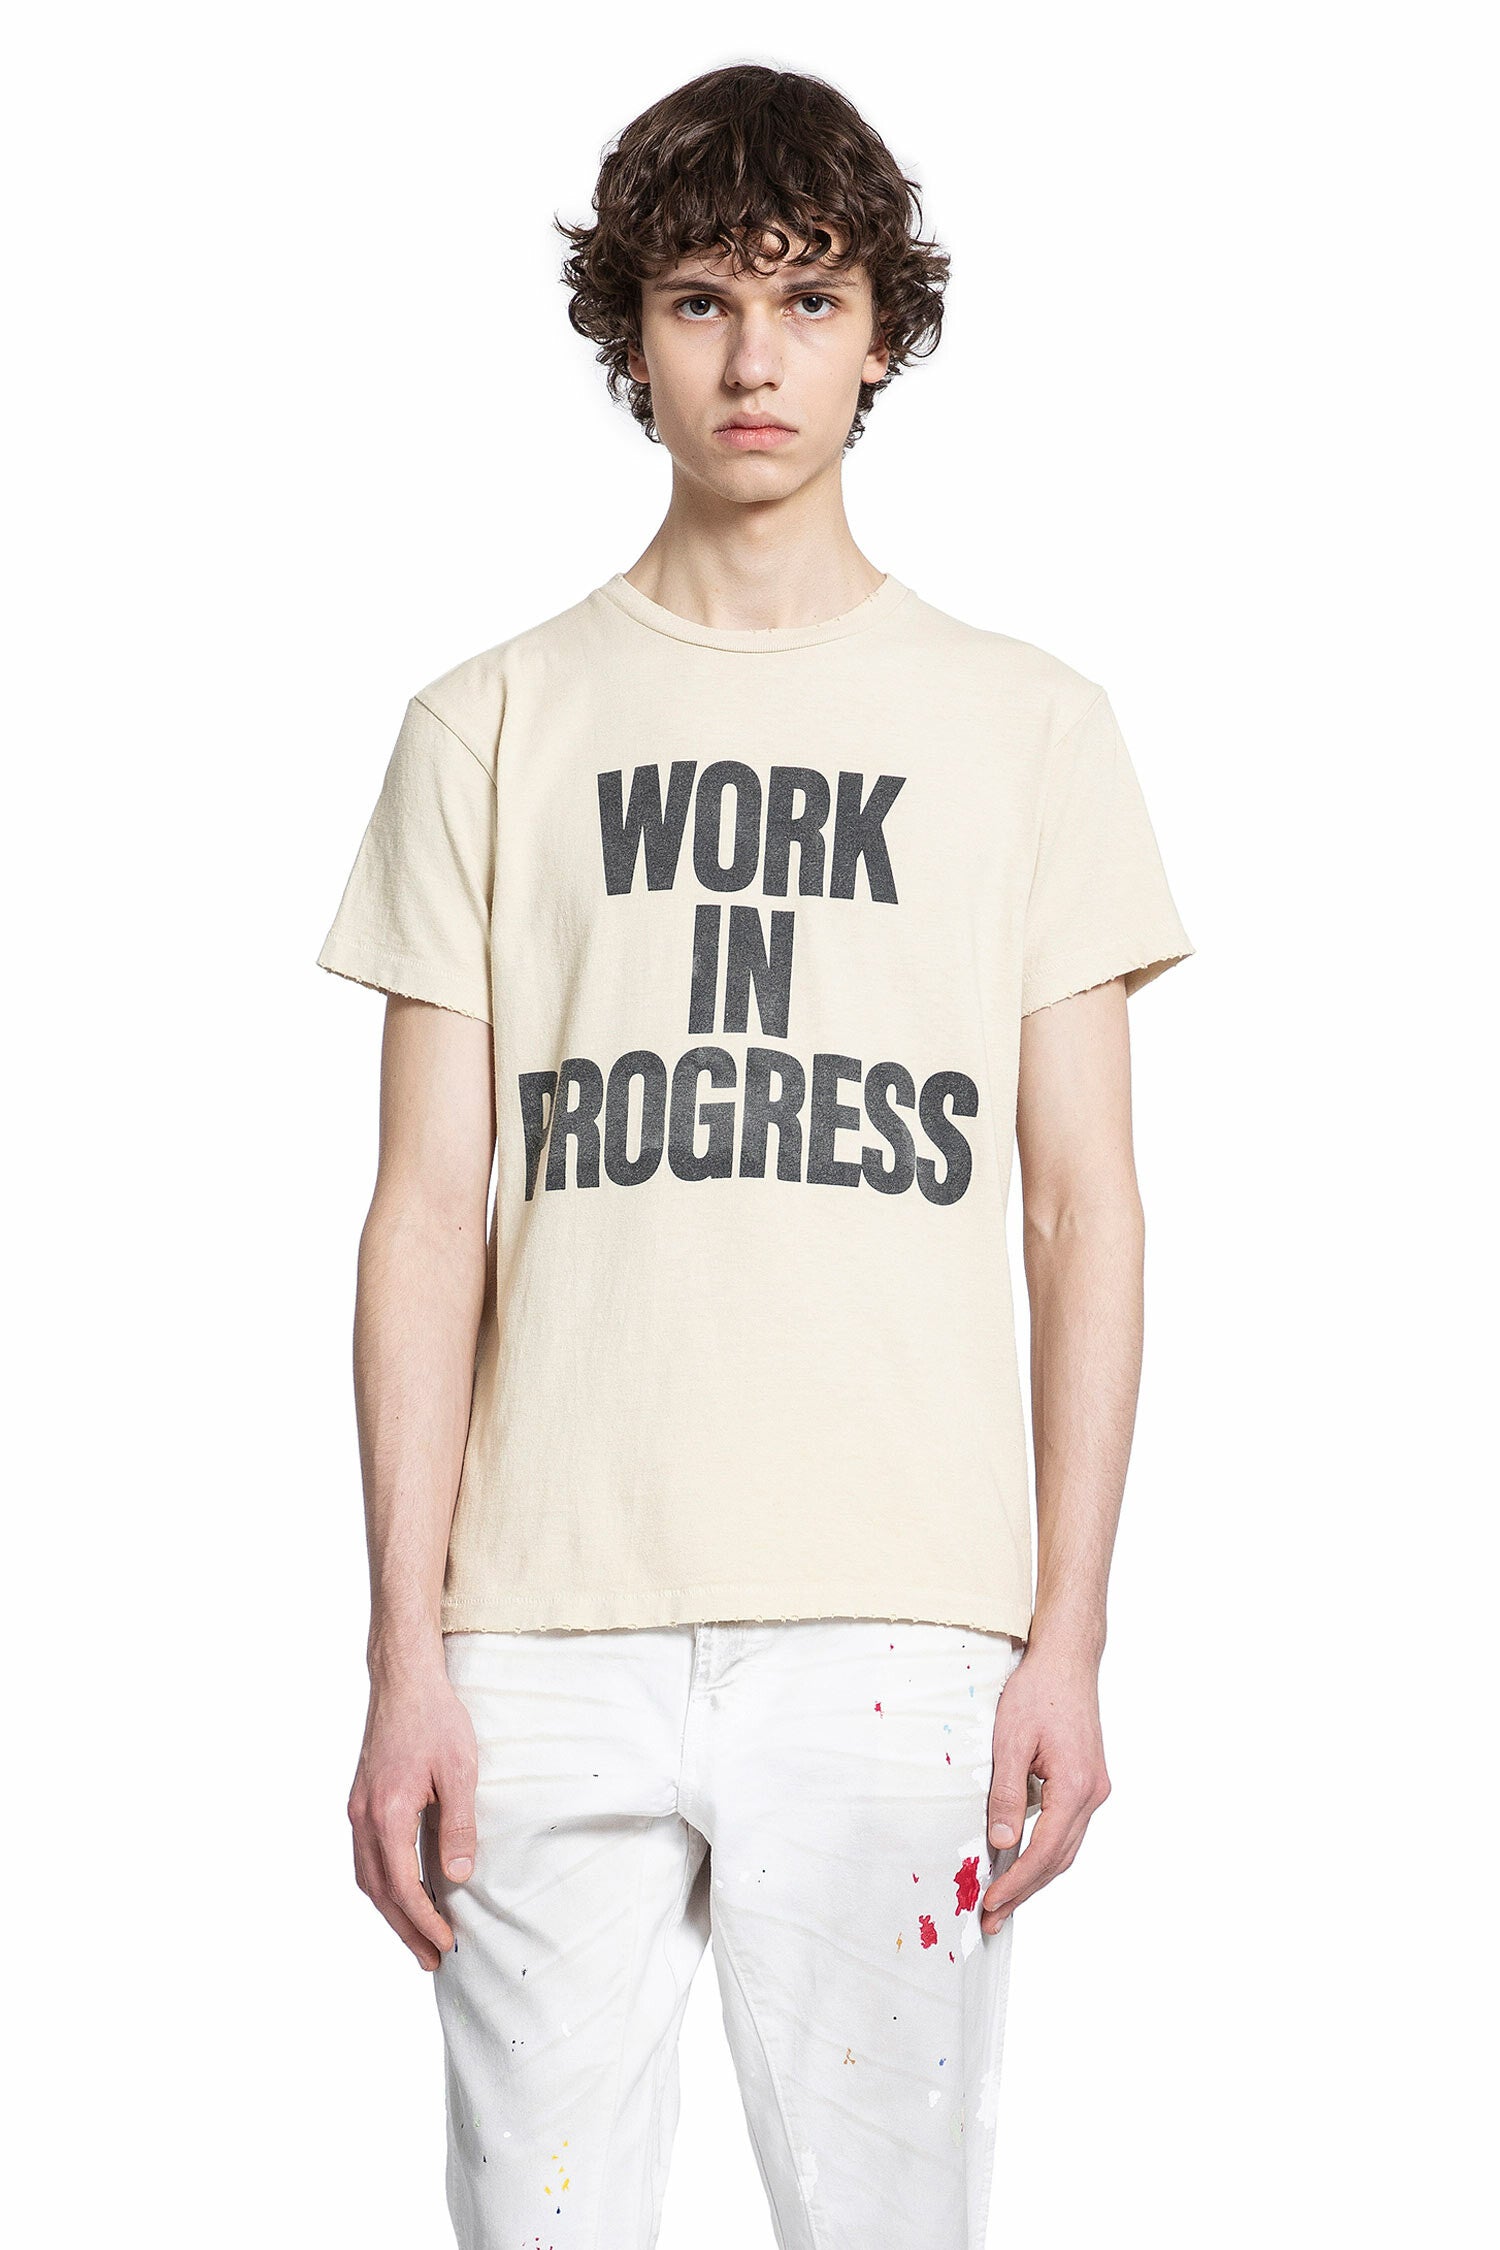 GALLERY DEPT. MAN OFF-WHITE T-SHIRTS & TANK TOPS